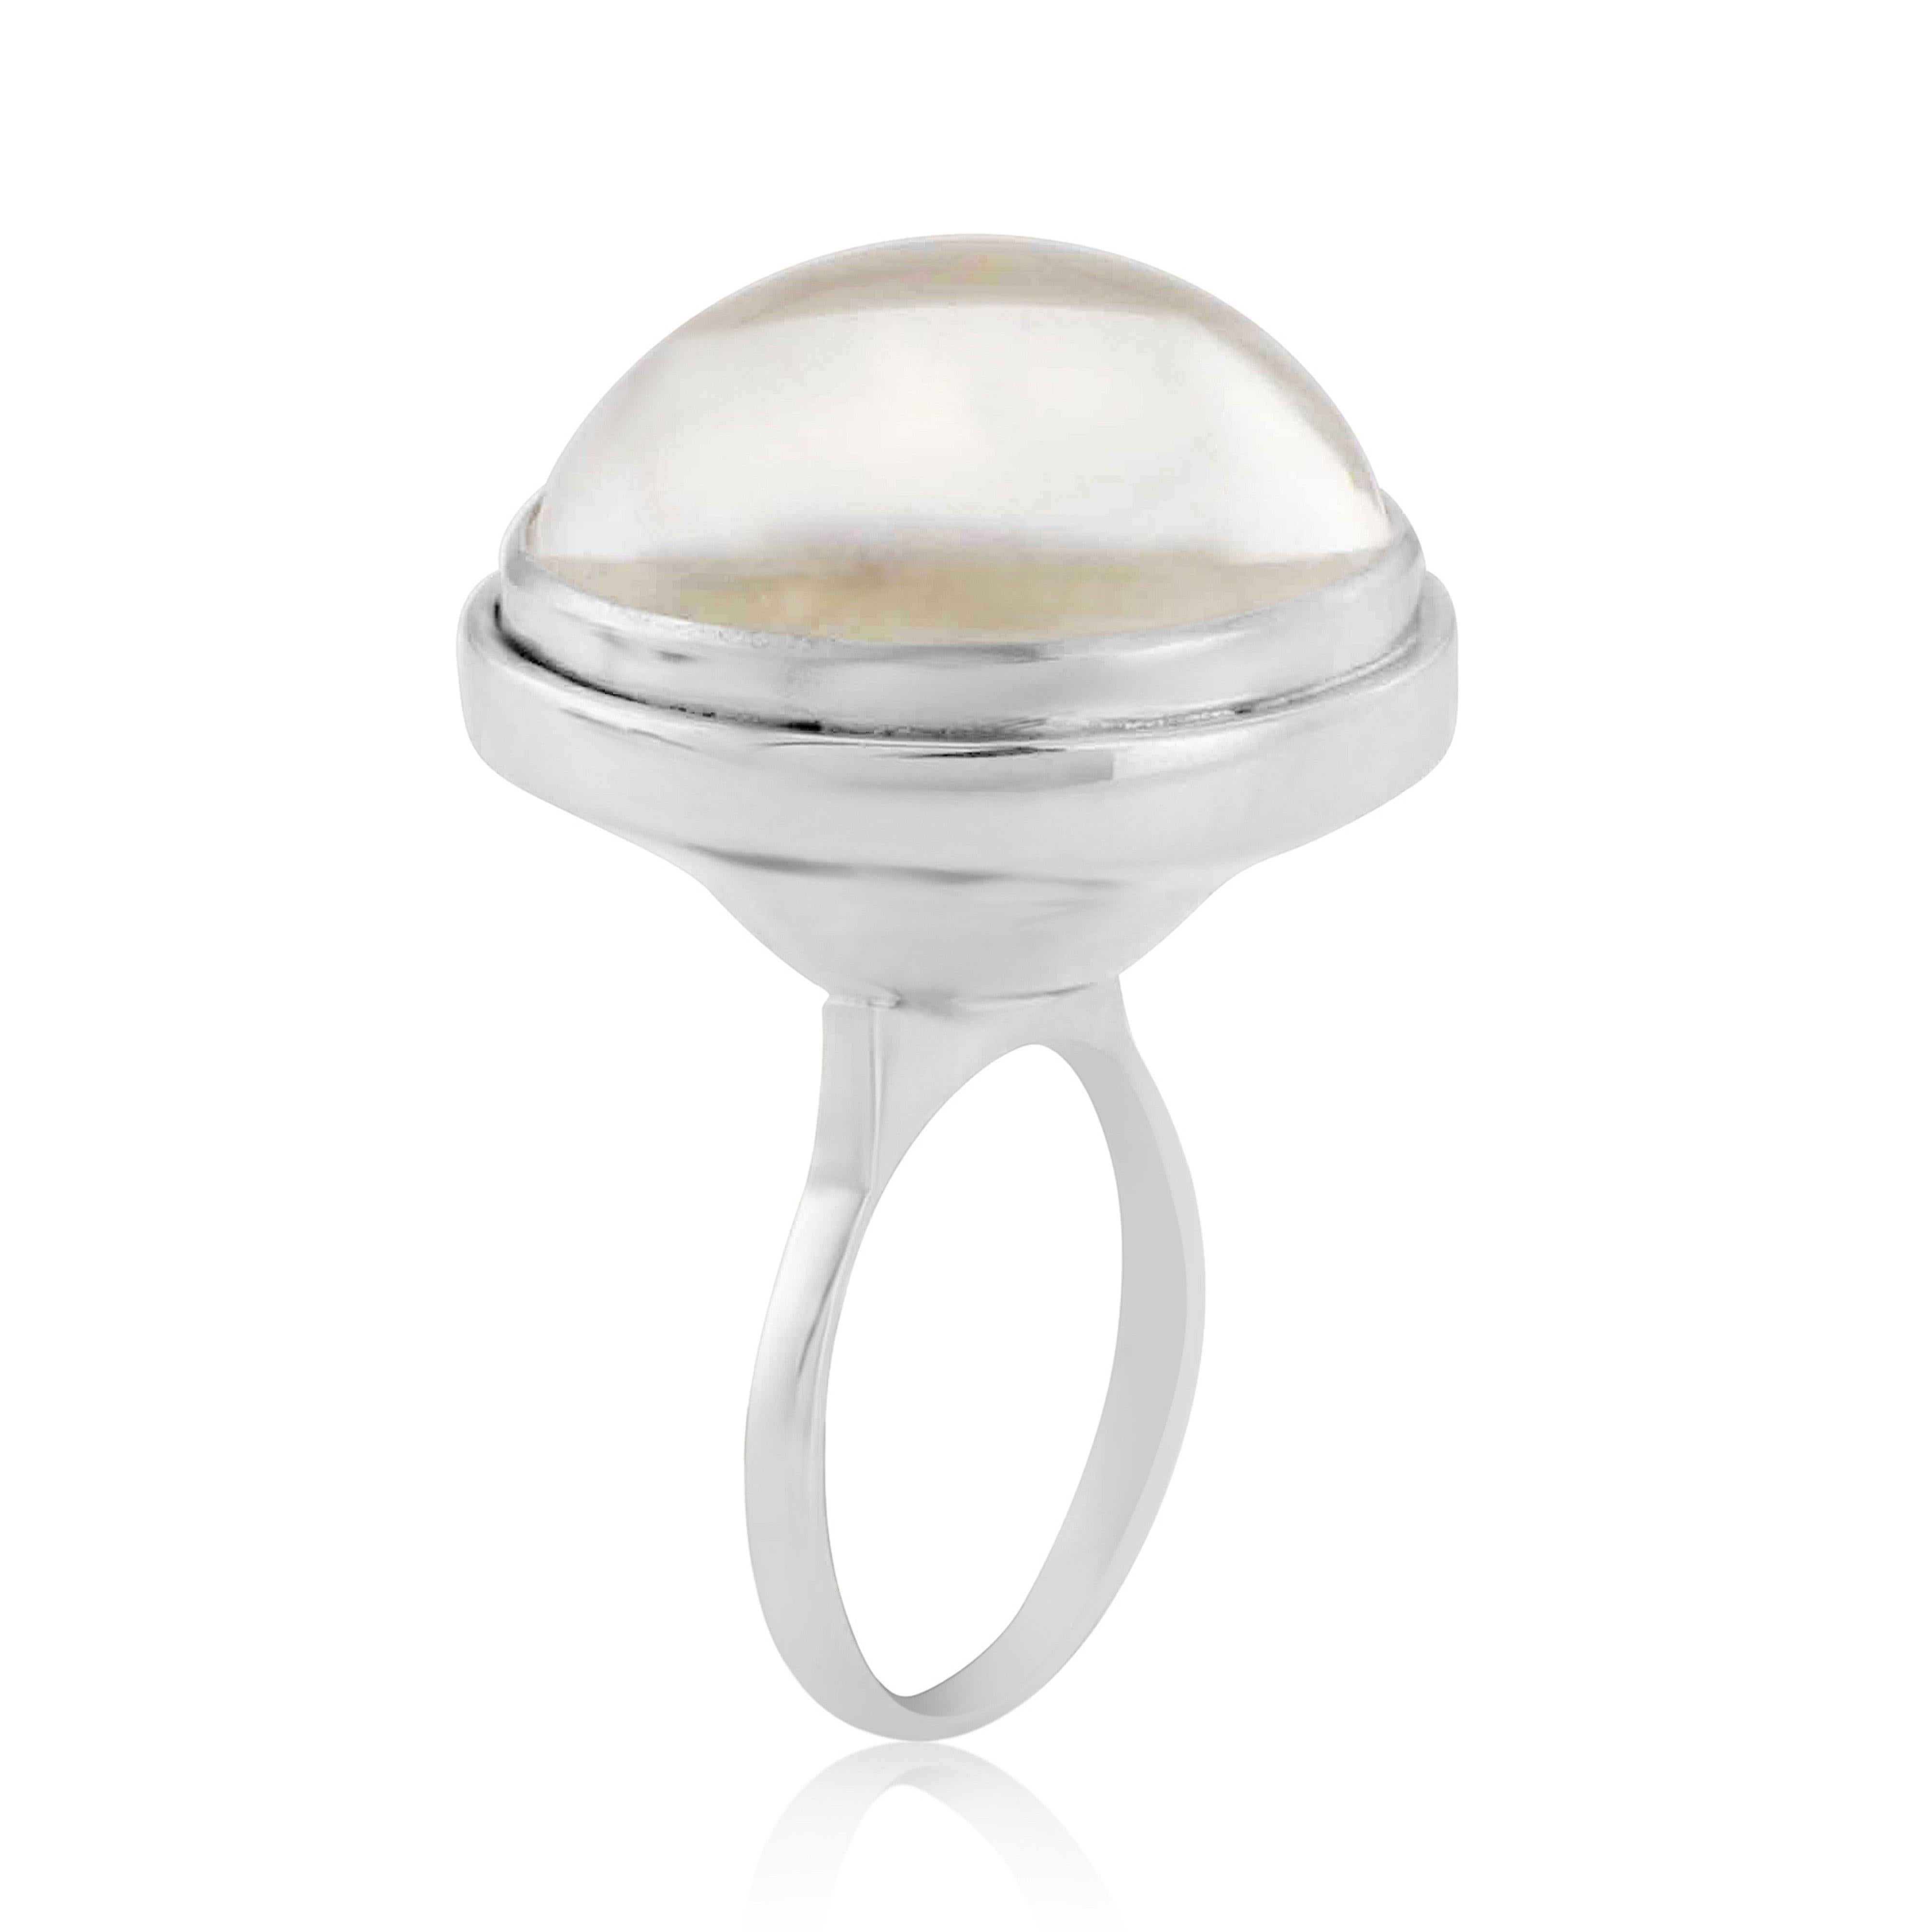 This modern handmade Solid Sterling Silver Ring, set with rock crystal Cabochon is from MAIKO NAGAYAMA's Pret-a-porter Collection called 